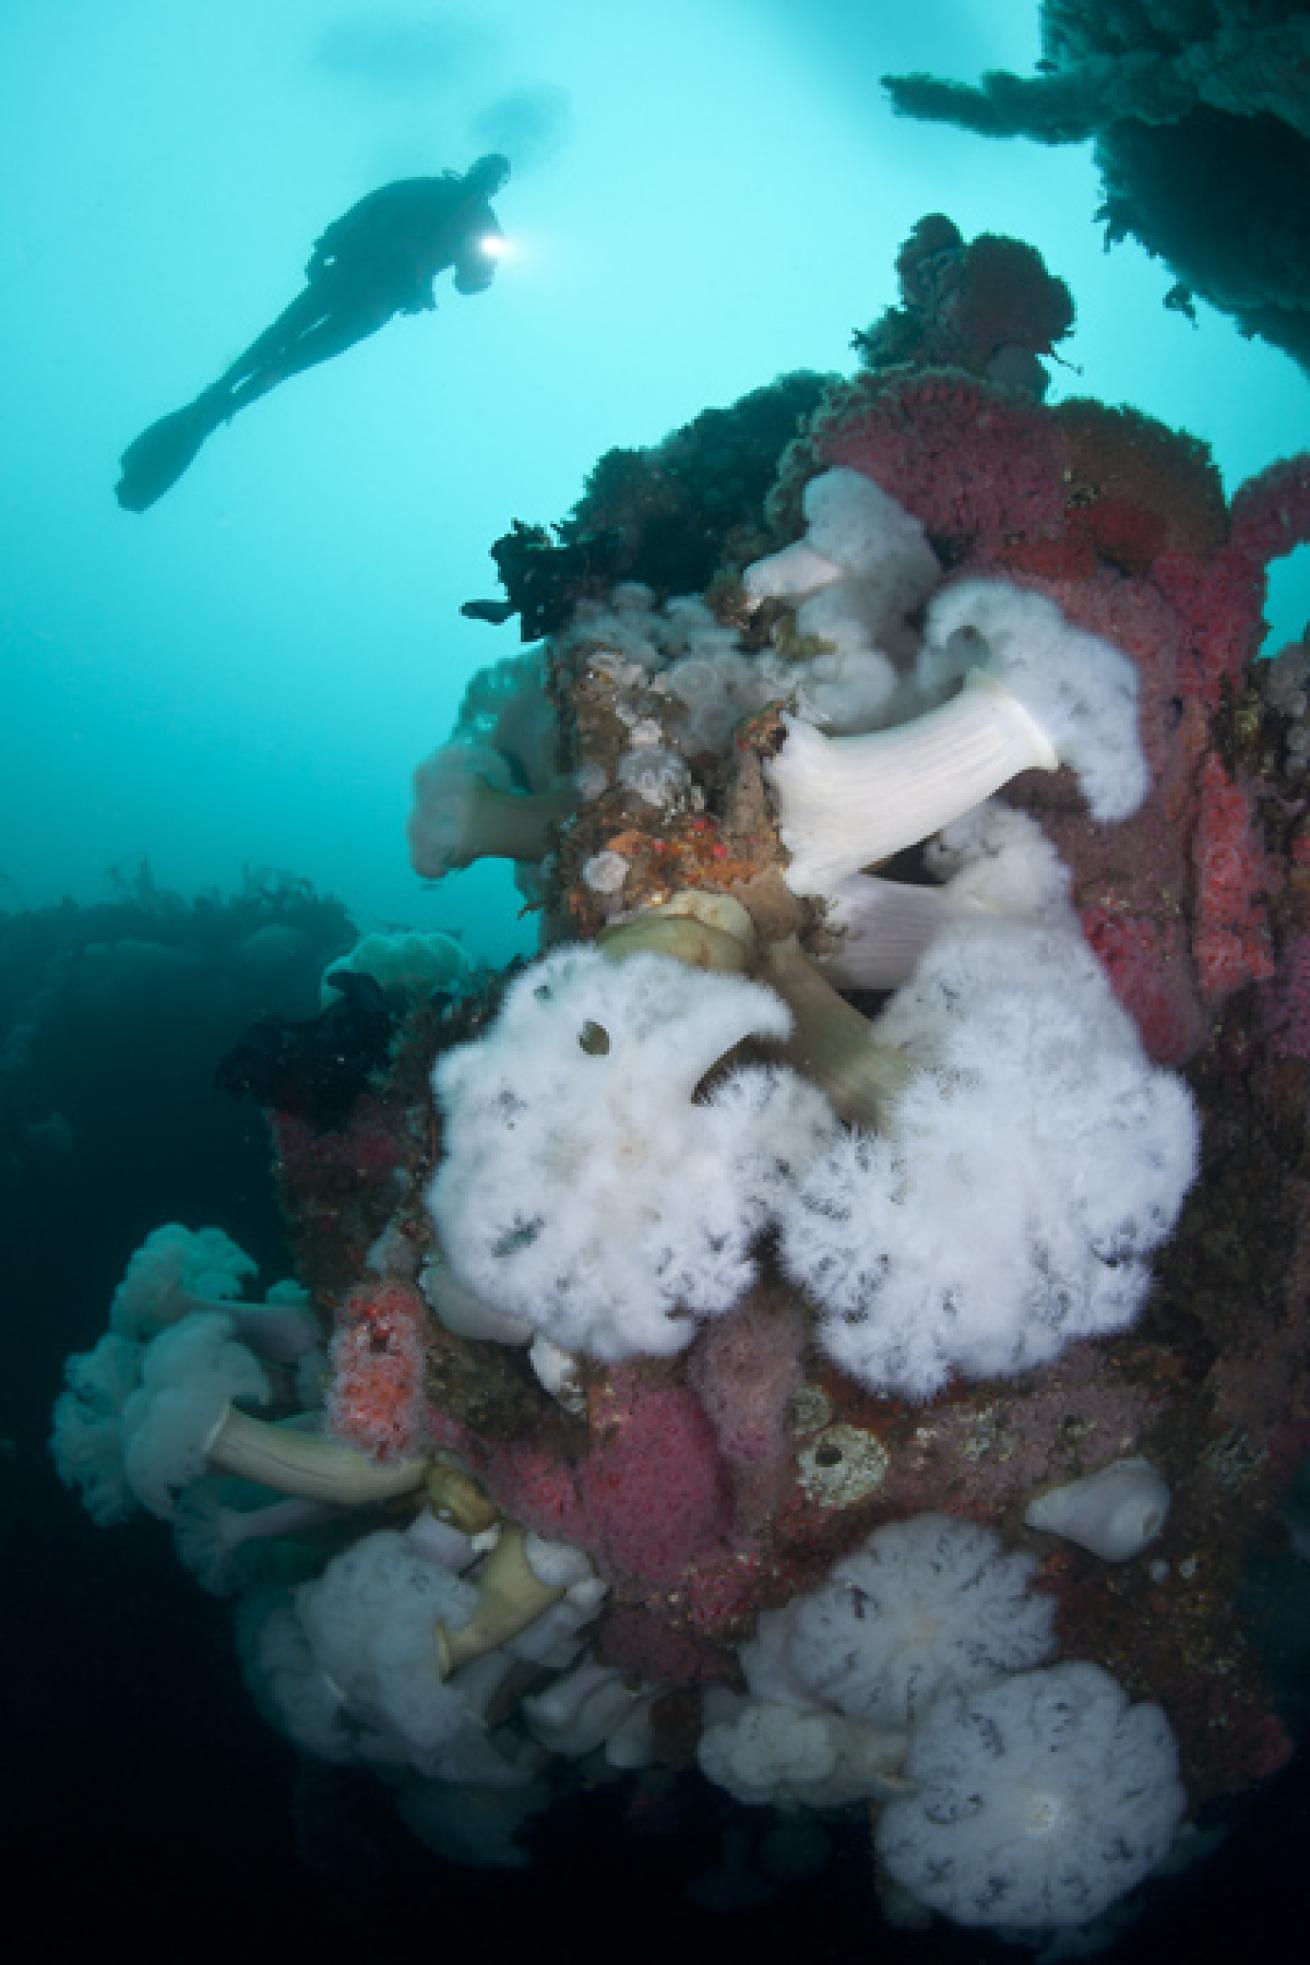 Coral and Anemones on HMCS Yukon